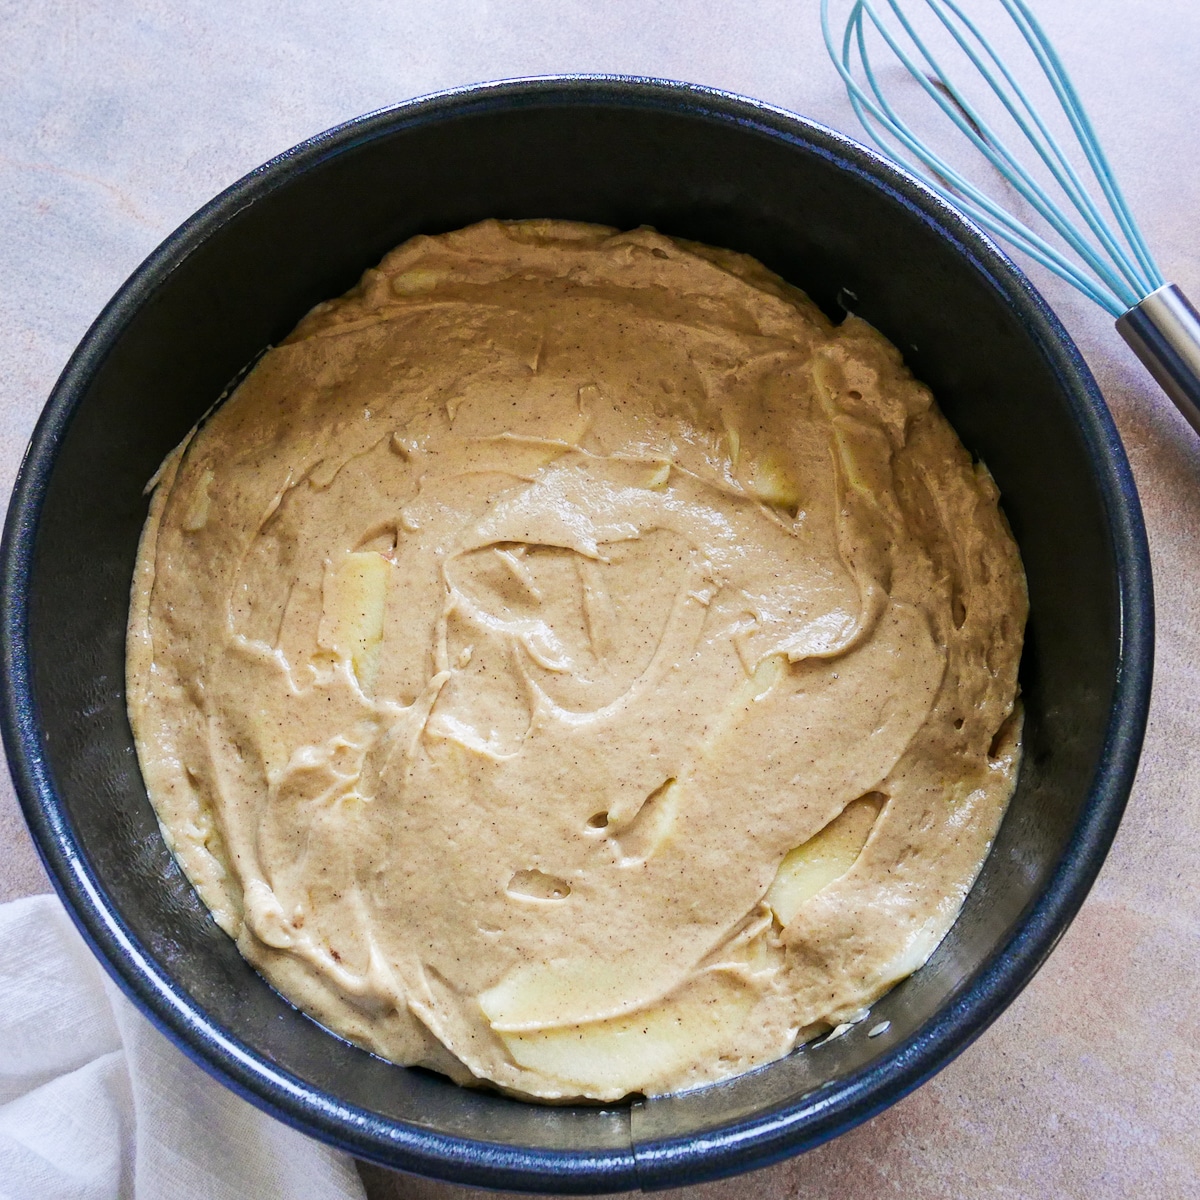 Sliced apples mixed into cake batter and poured into a prepared springform pan.